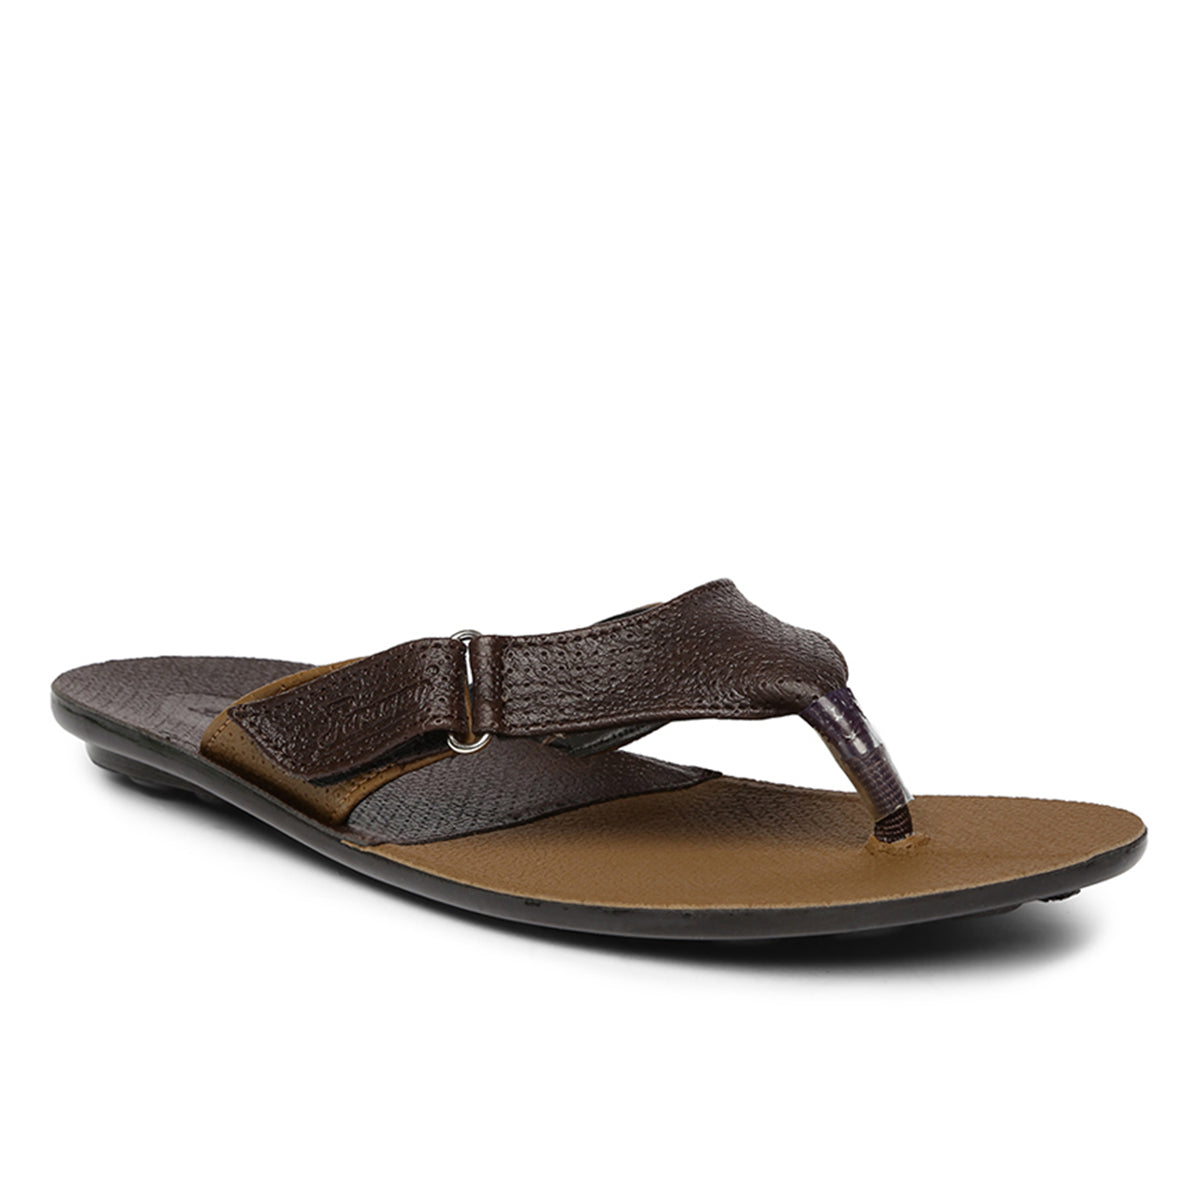 Paragon PU6717G Men Stylish Lightweight Flipflops | Comfortable with Anti skid soles | Casual &amp; Trendy Slippers | Indoor &amp; Outdoor